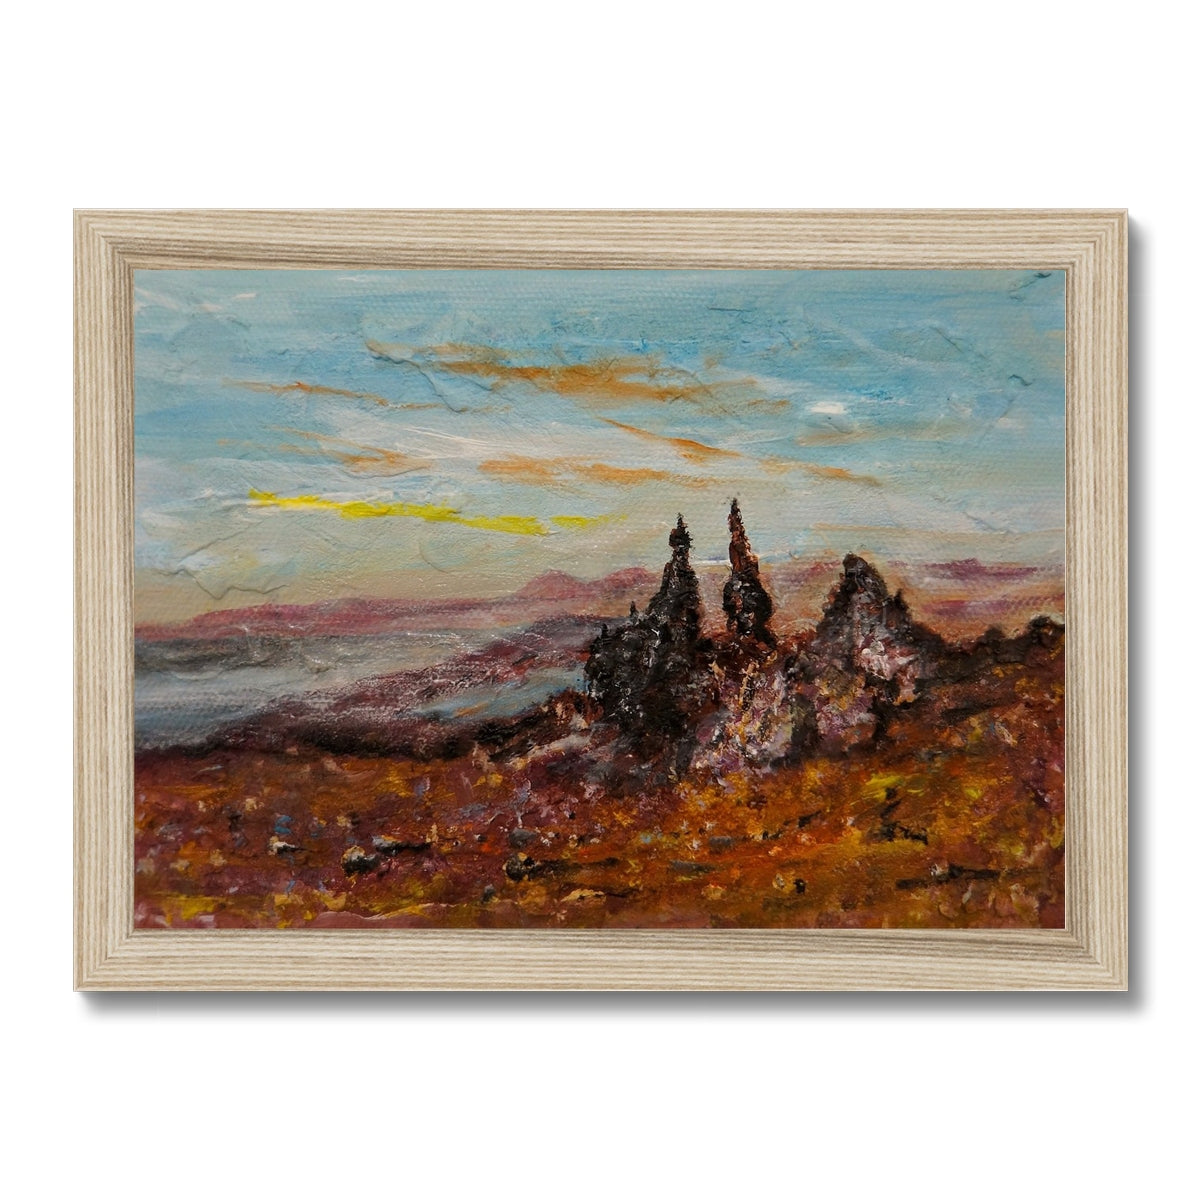 The Storr Skye Painting | Framed Prints From Scotland-Framed Prints-Skye Art Gallery-A4 Landscape-Natural Frame-Paintings, Prints, Homeware, Art Gifts From Scotland By Scottish Artist Kevin Hunter